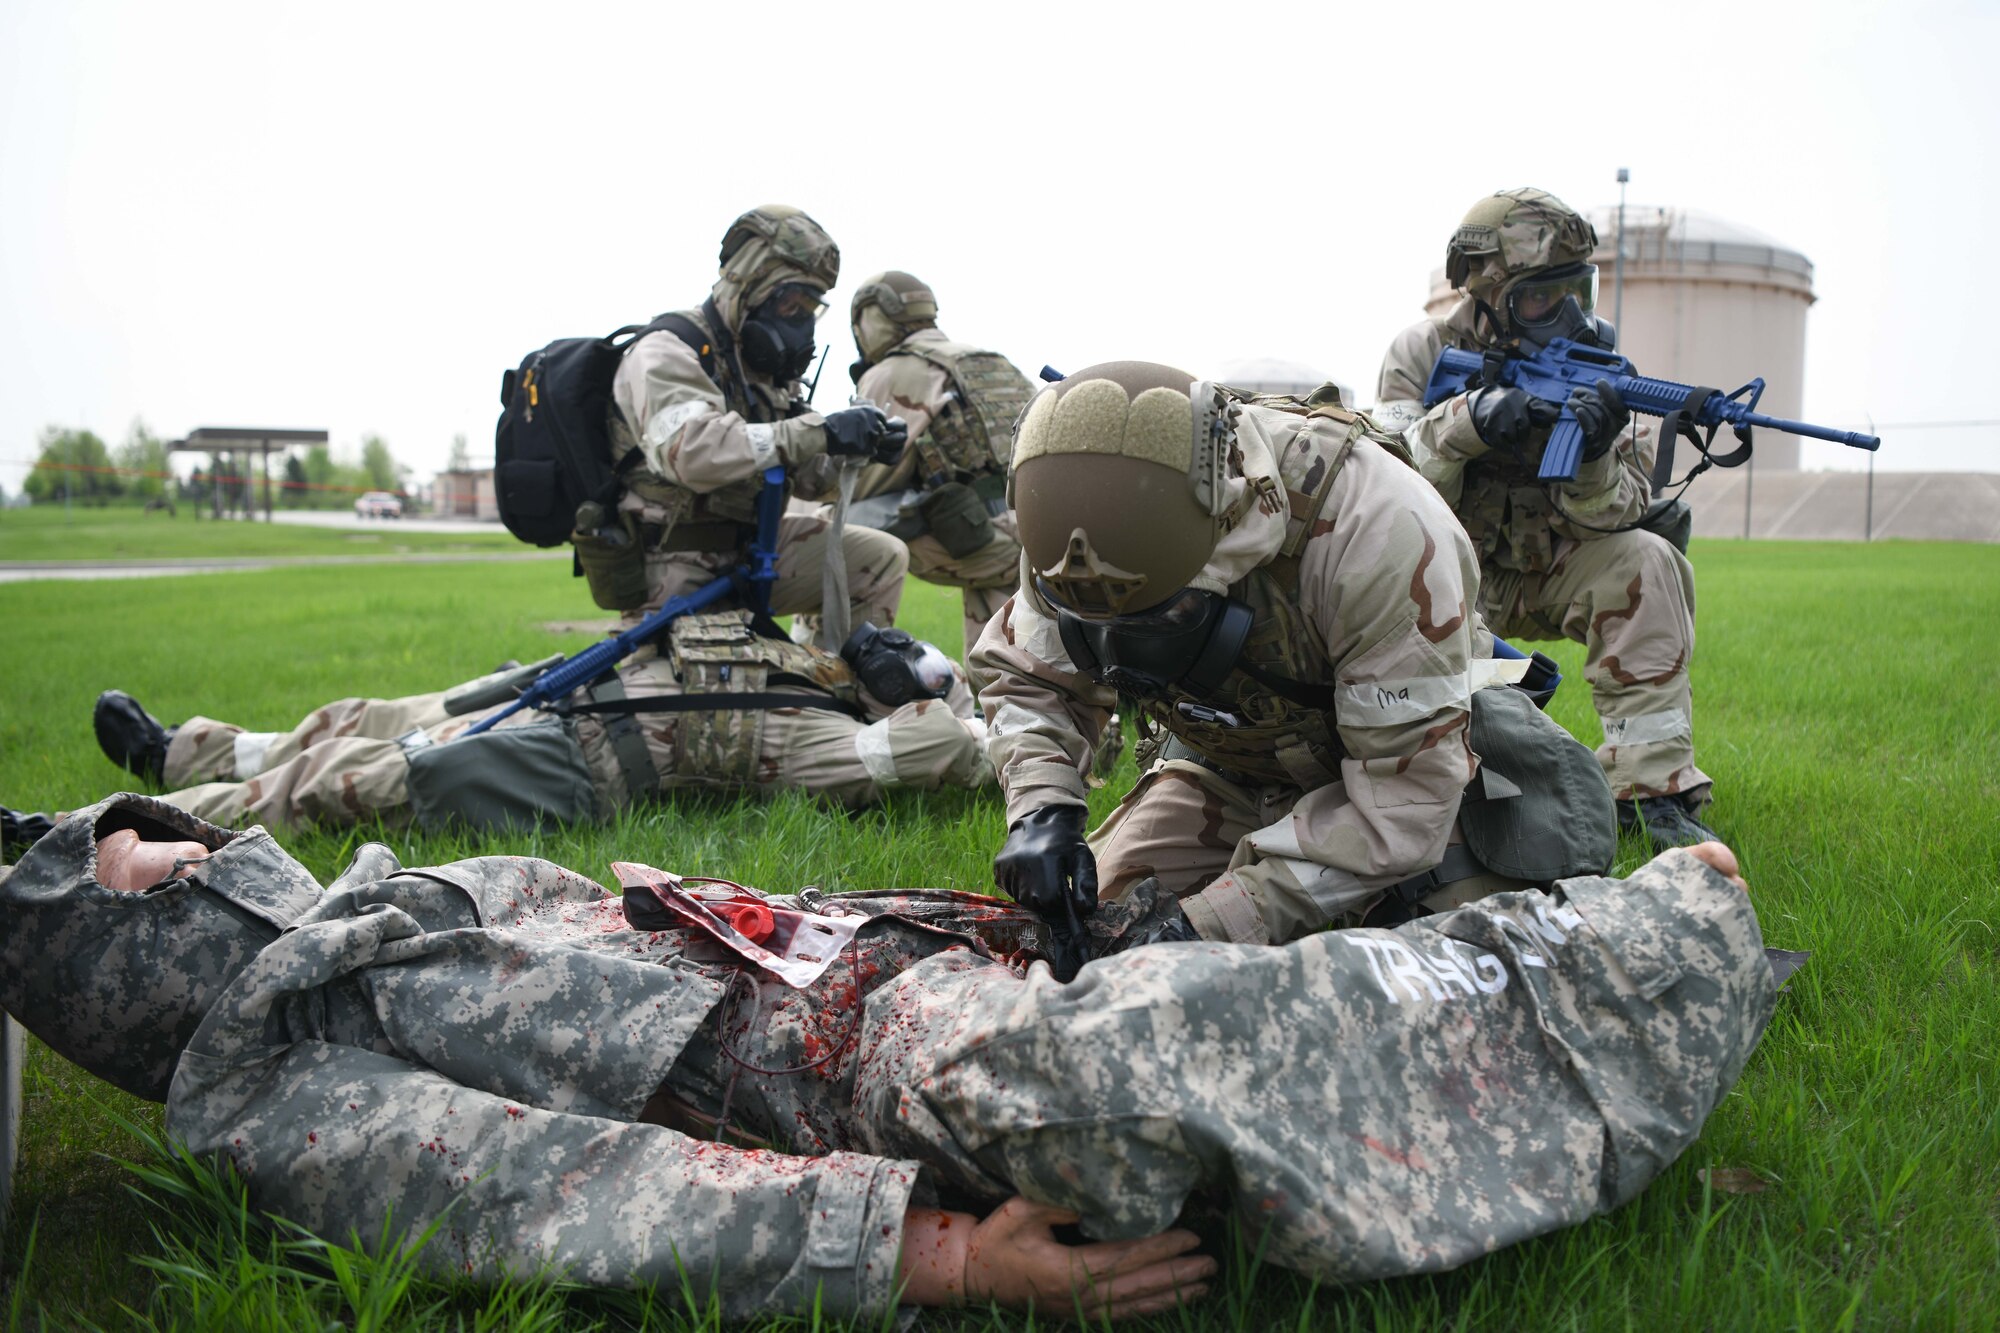 Two airmen in CBRN gear administer medical aid to two mannequins on green grass.